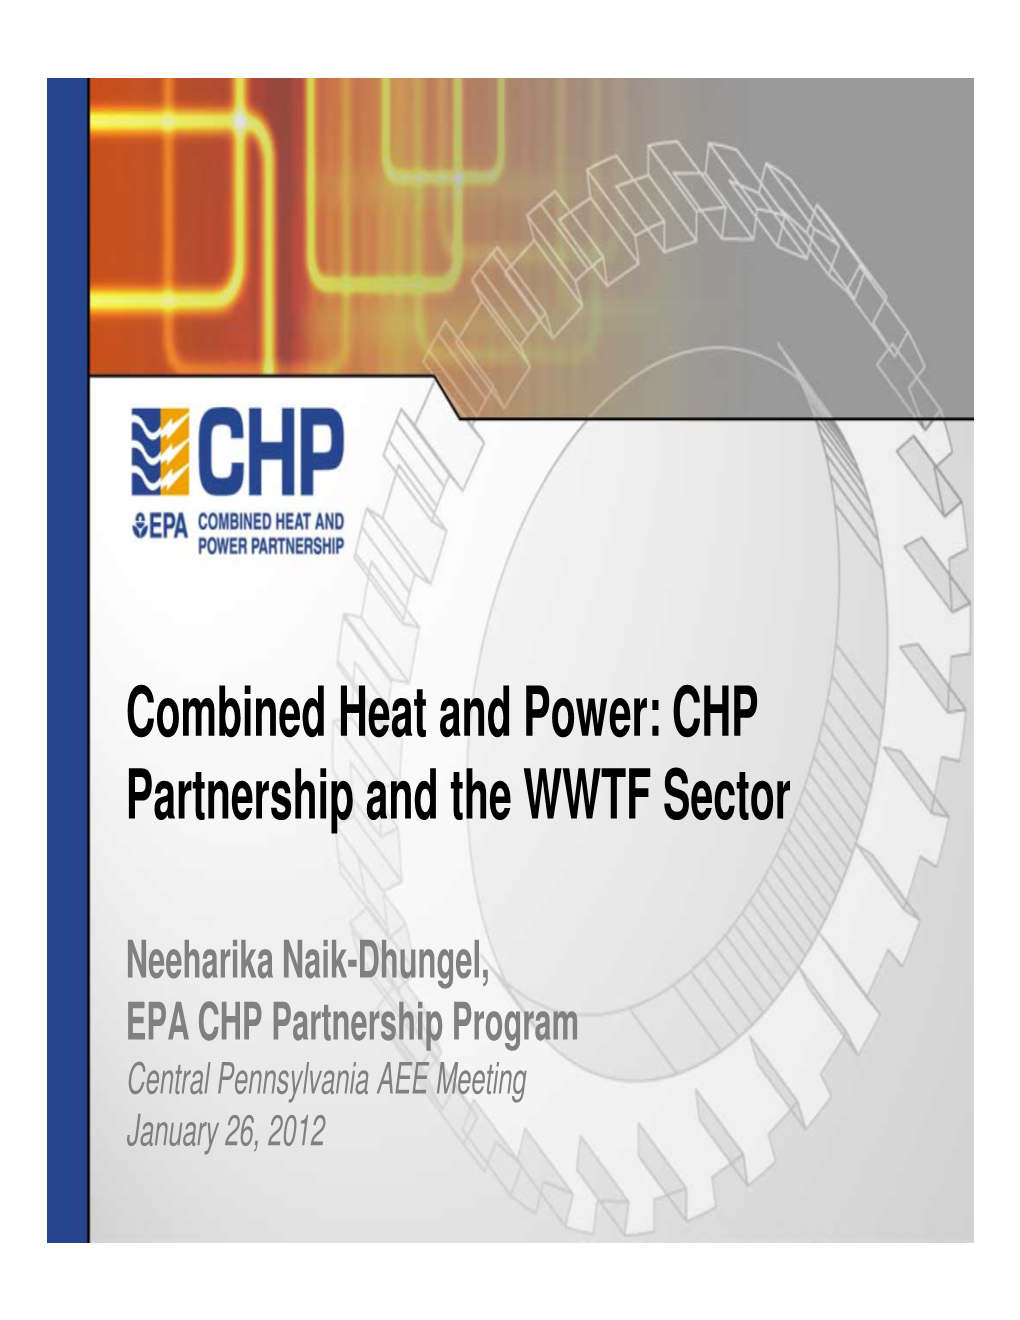 Combined Heat and Power: CHP Partnership and the WWTF Sector